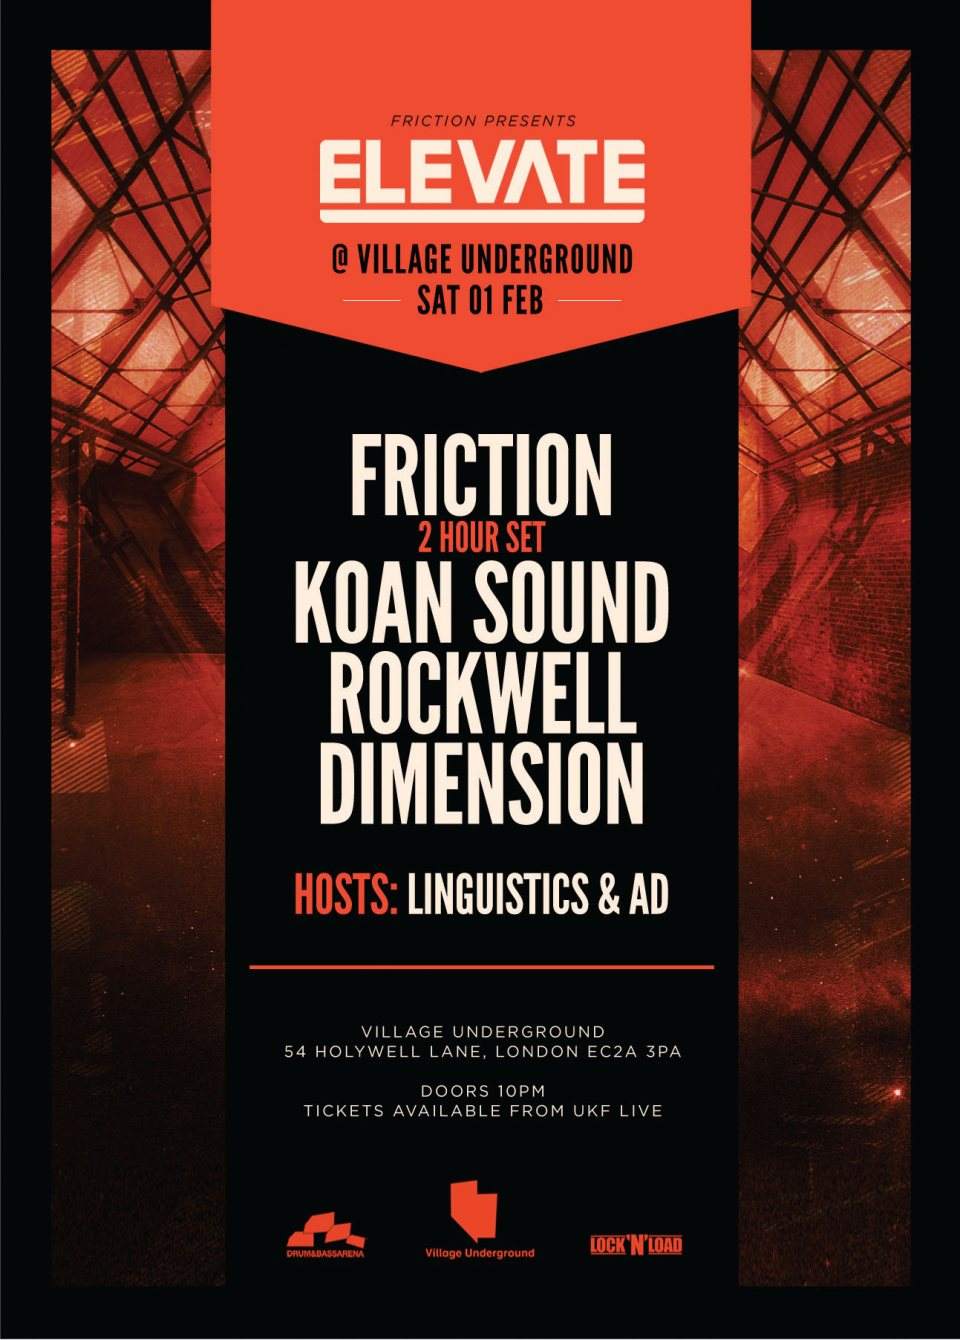 Friction presents Elevate with Koan Sound, Rockwell & Dimension - Página trasera